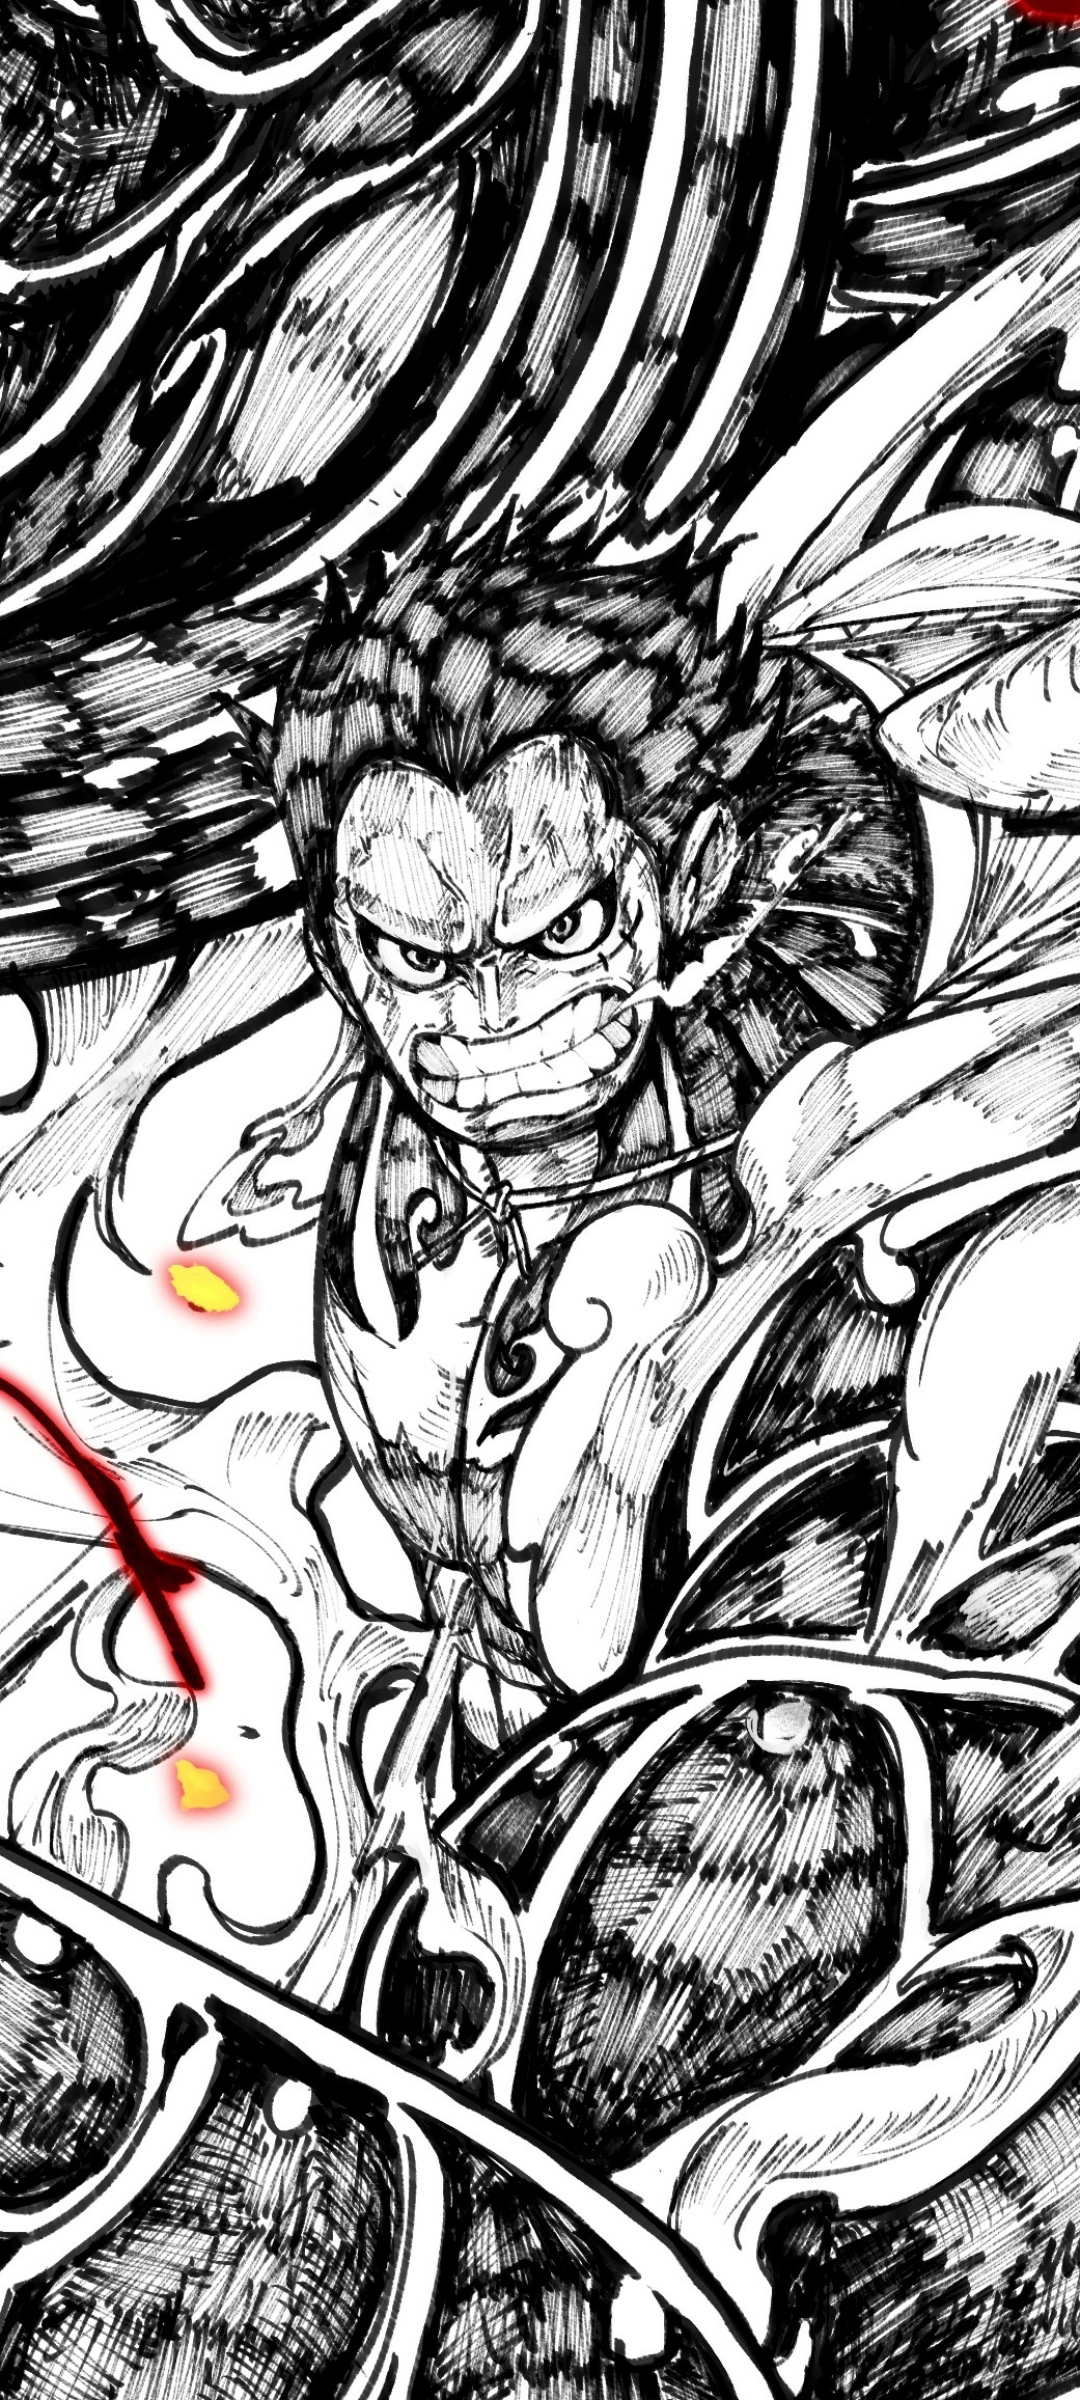 Monkey D. Luffy in Gear Fourth by さとし【SATOSHI】